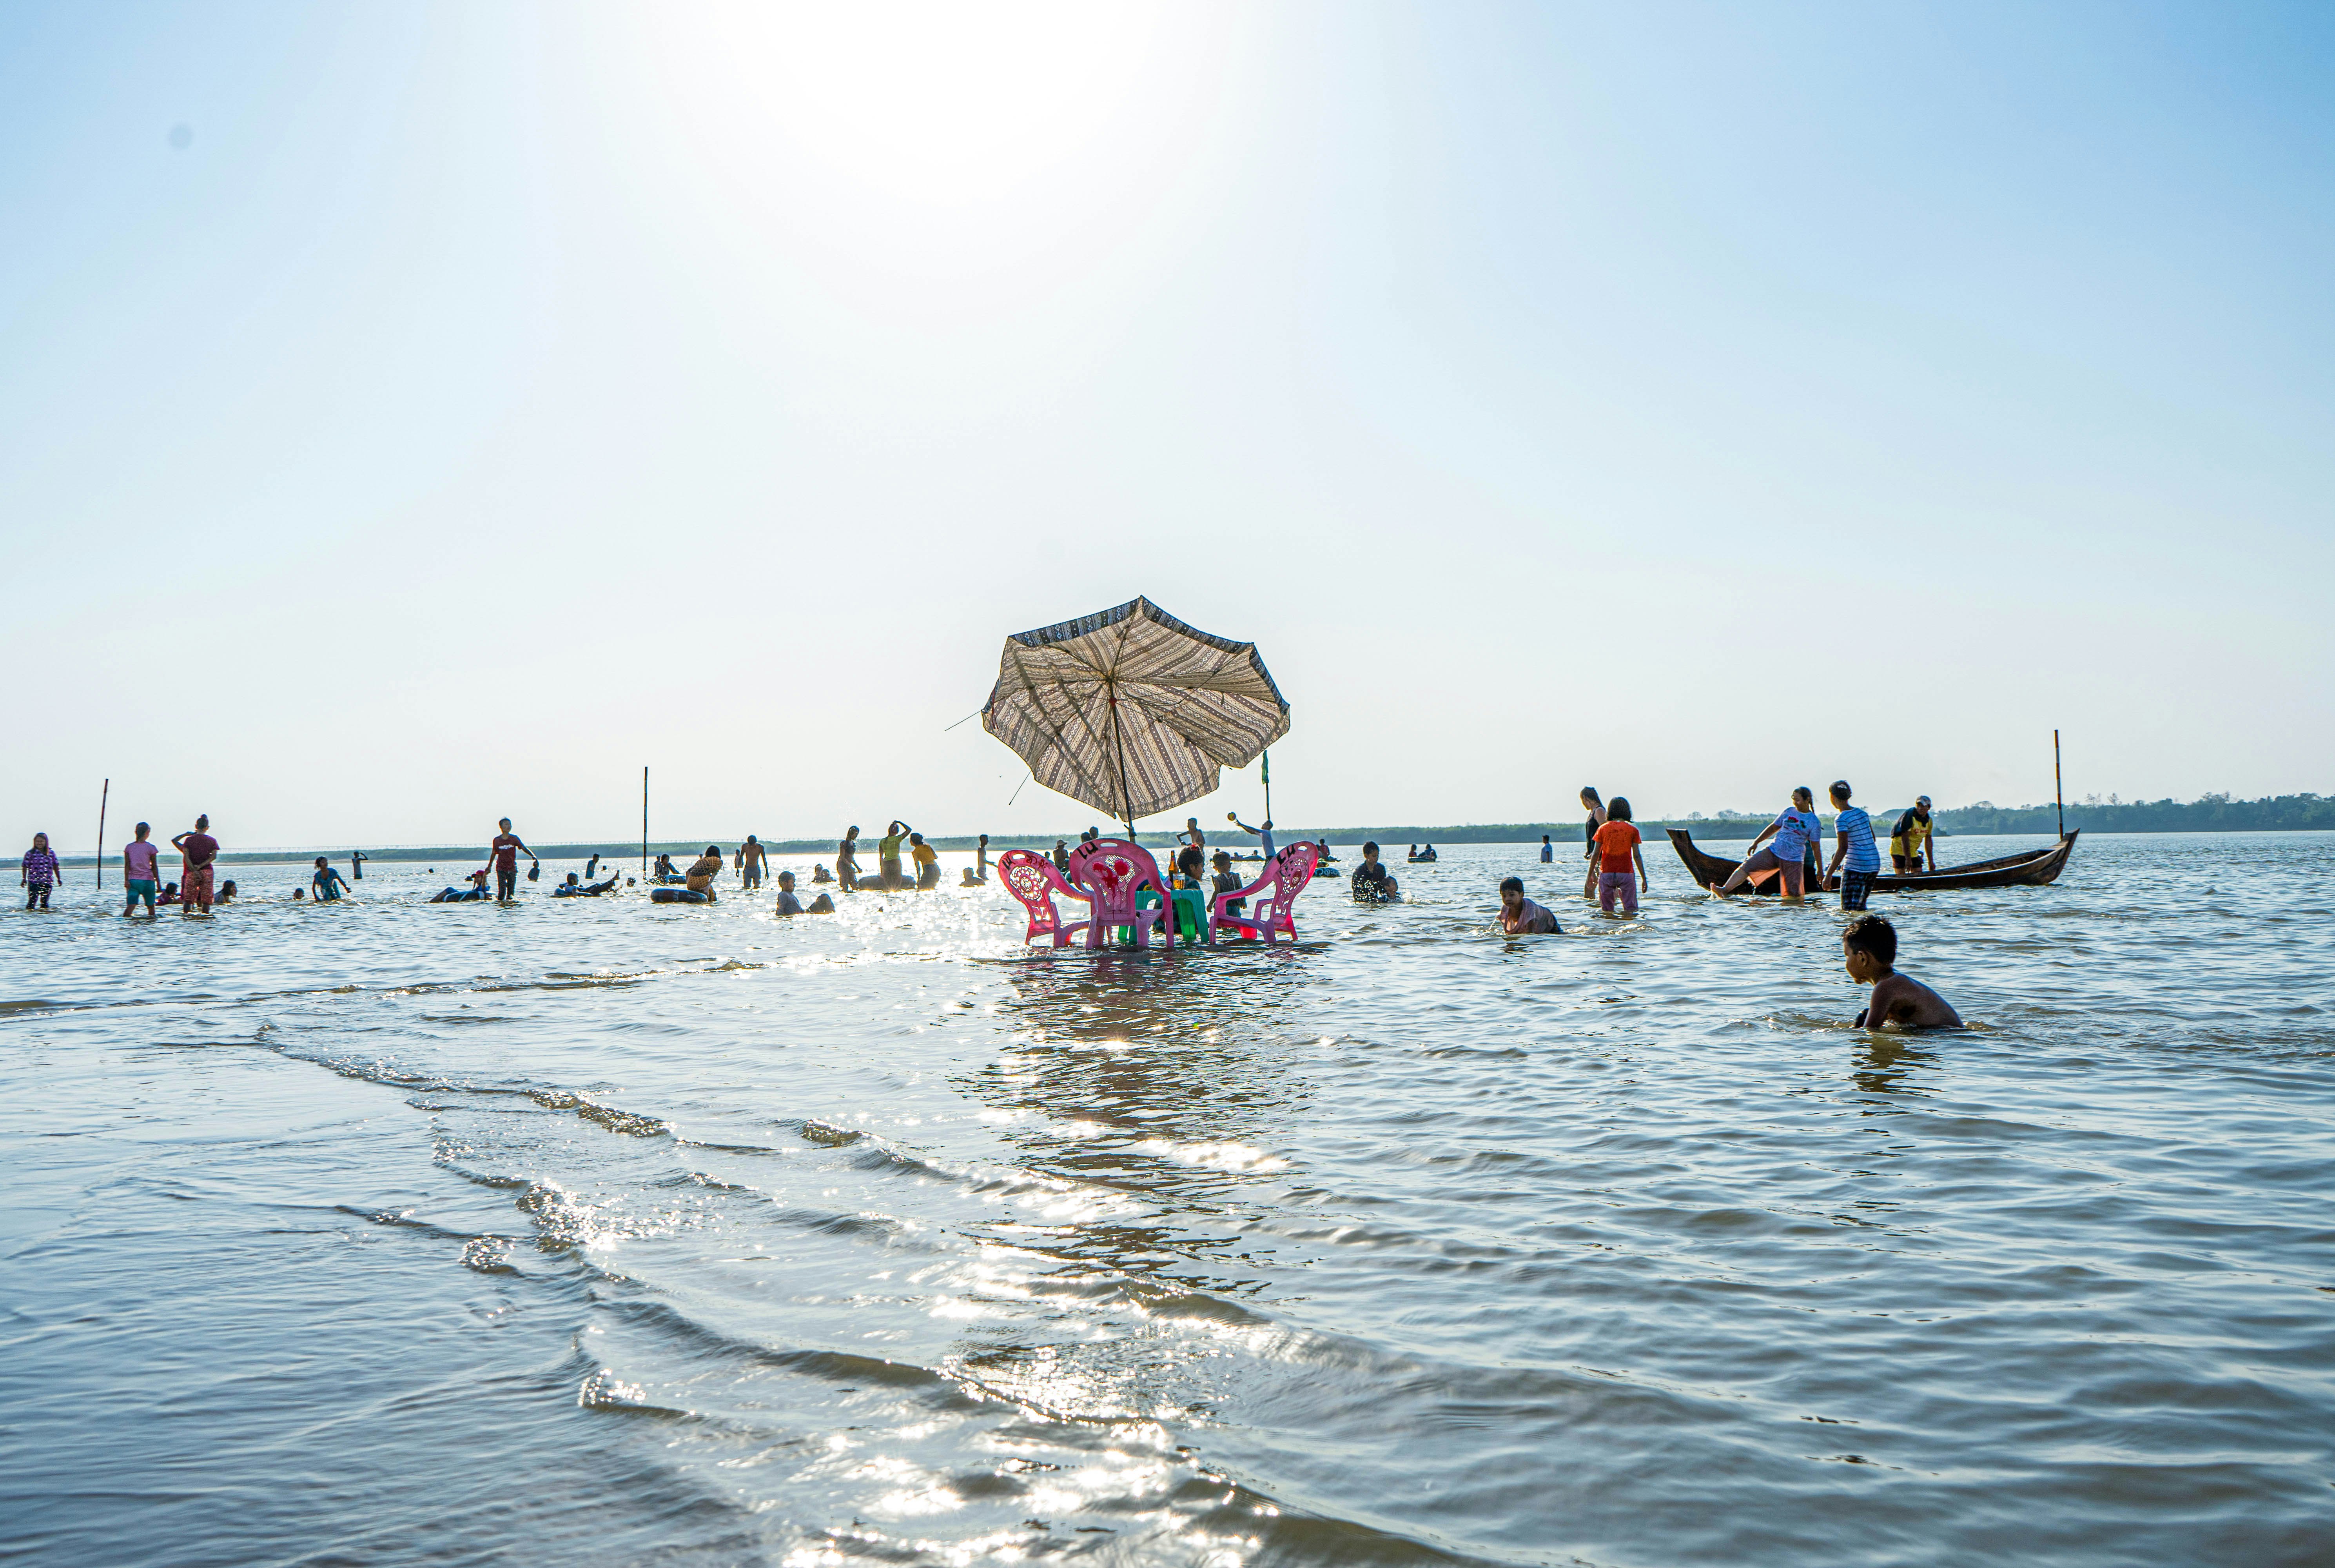 A table and three chairs are slowly submerged by the tide as it laps the beach in Myanmar. Many people are paddling in the shallow waters.